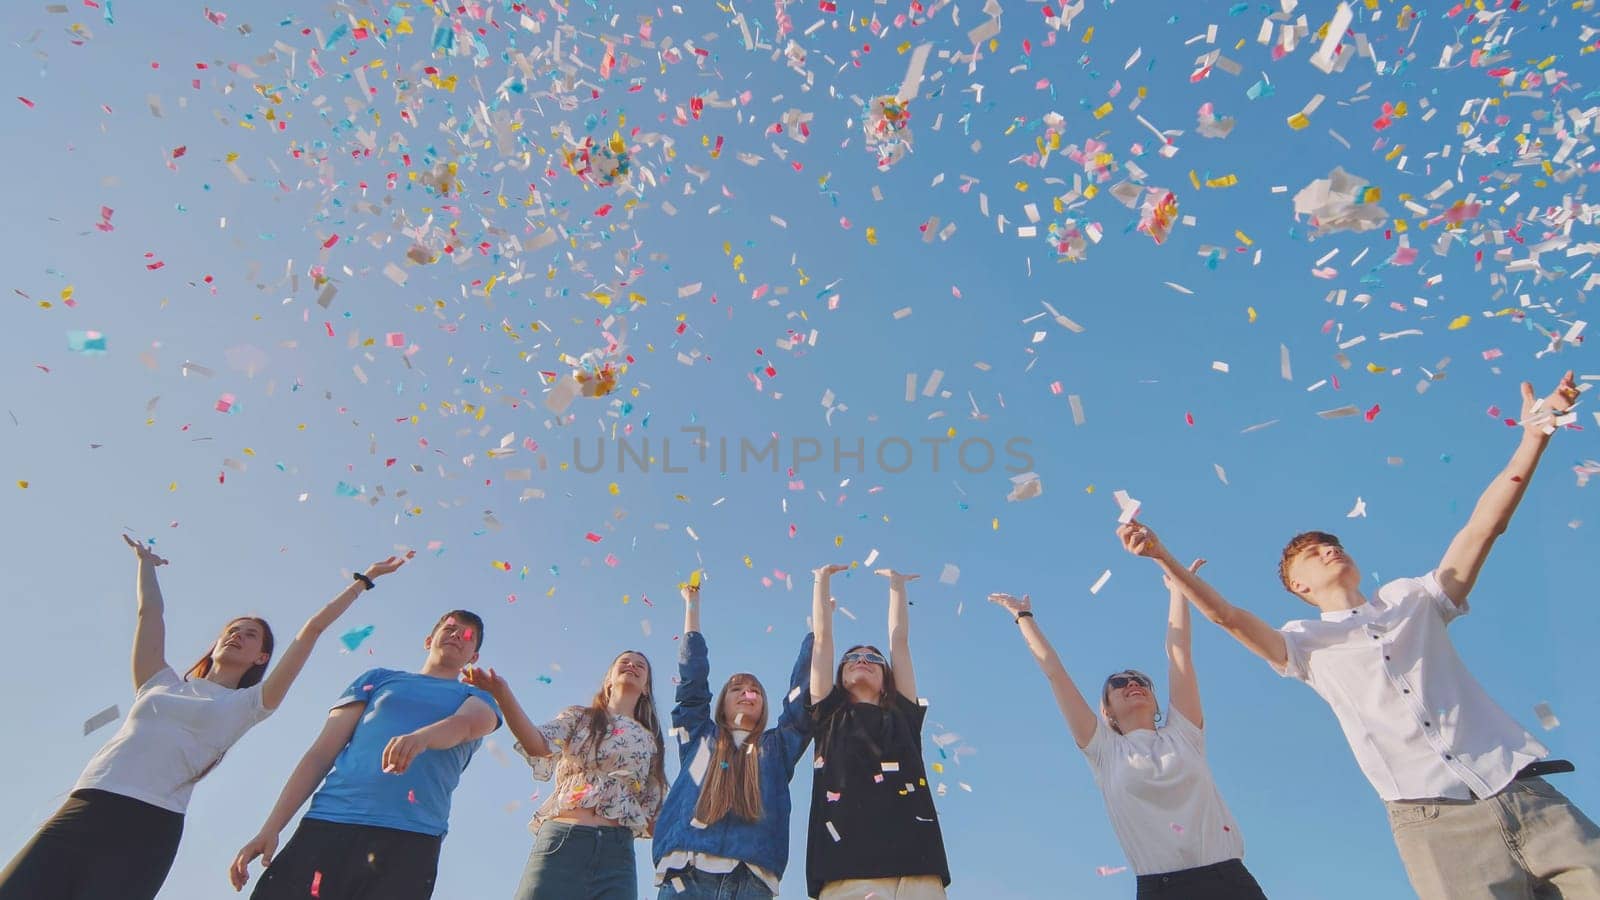 Friends toss colorful paper confetti from their hands. by DovidPro